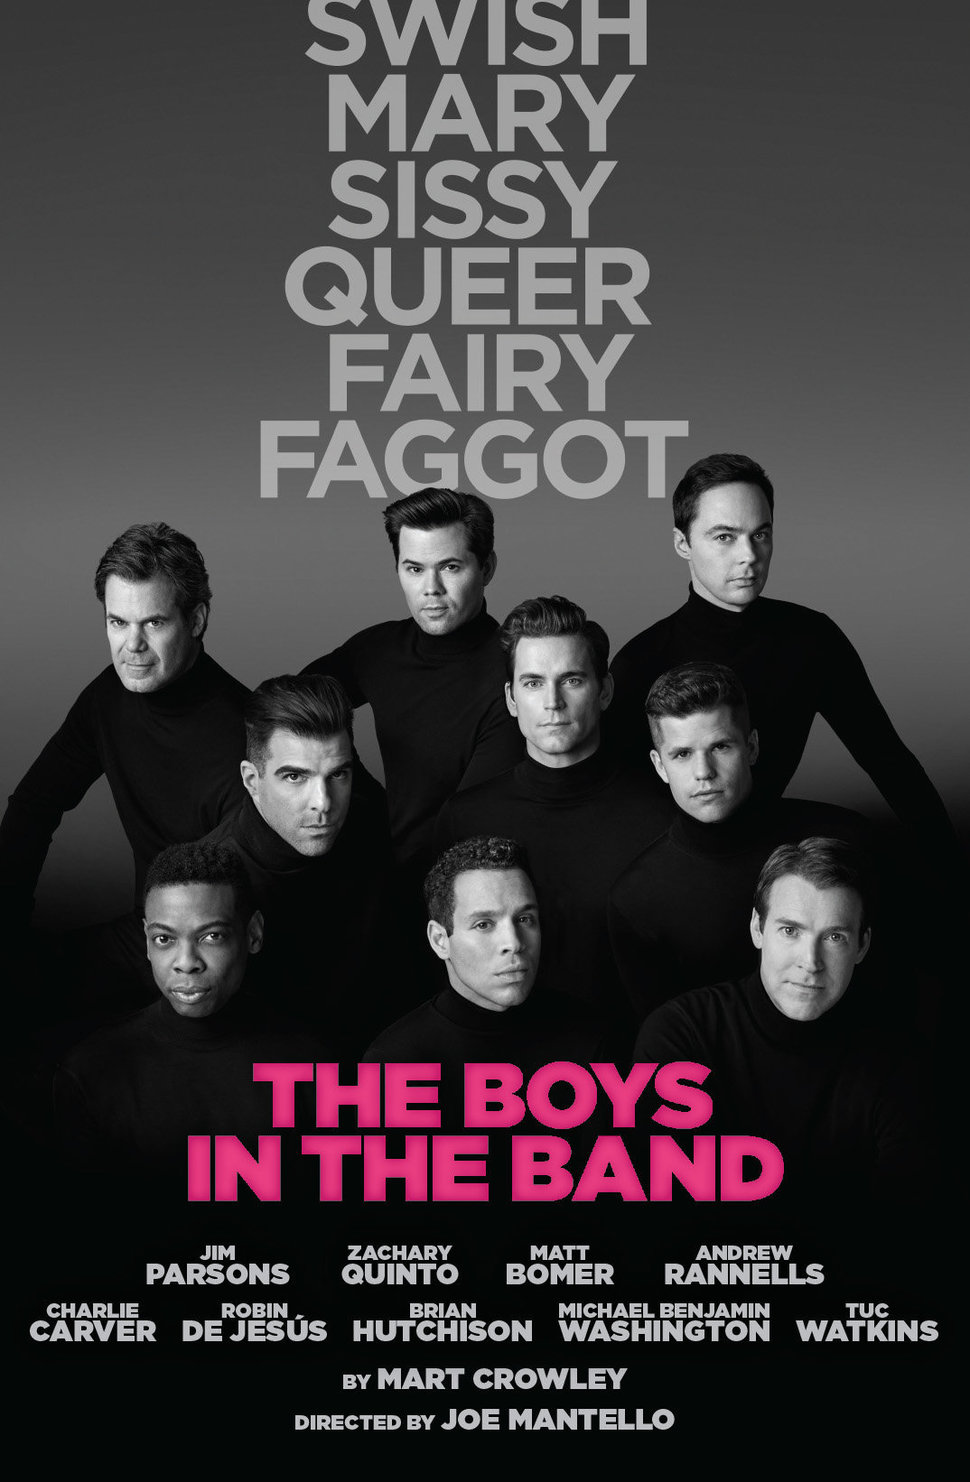 A poster for "The Boys in the Band."